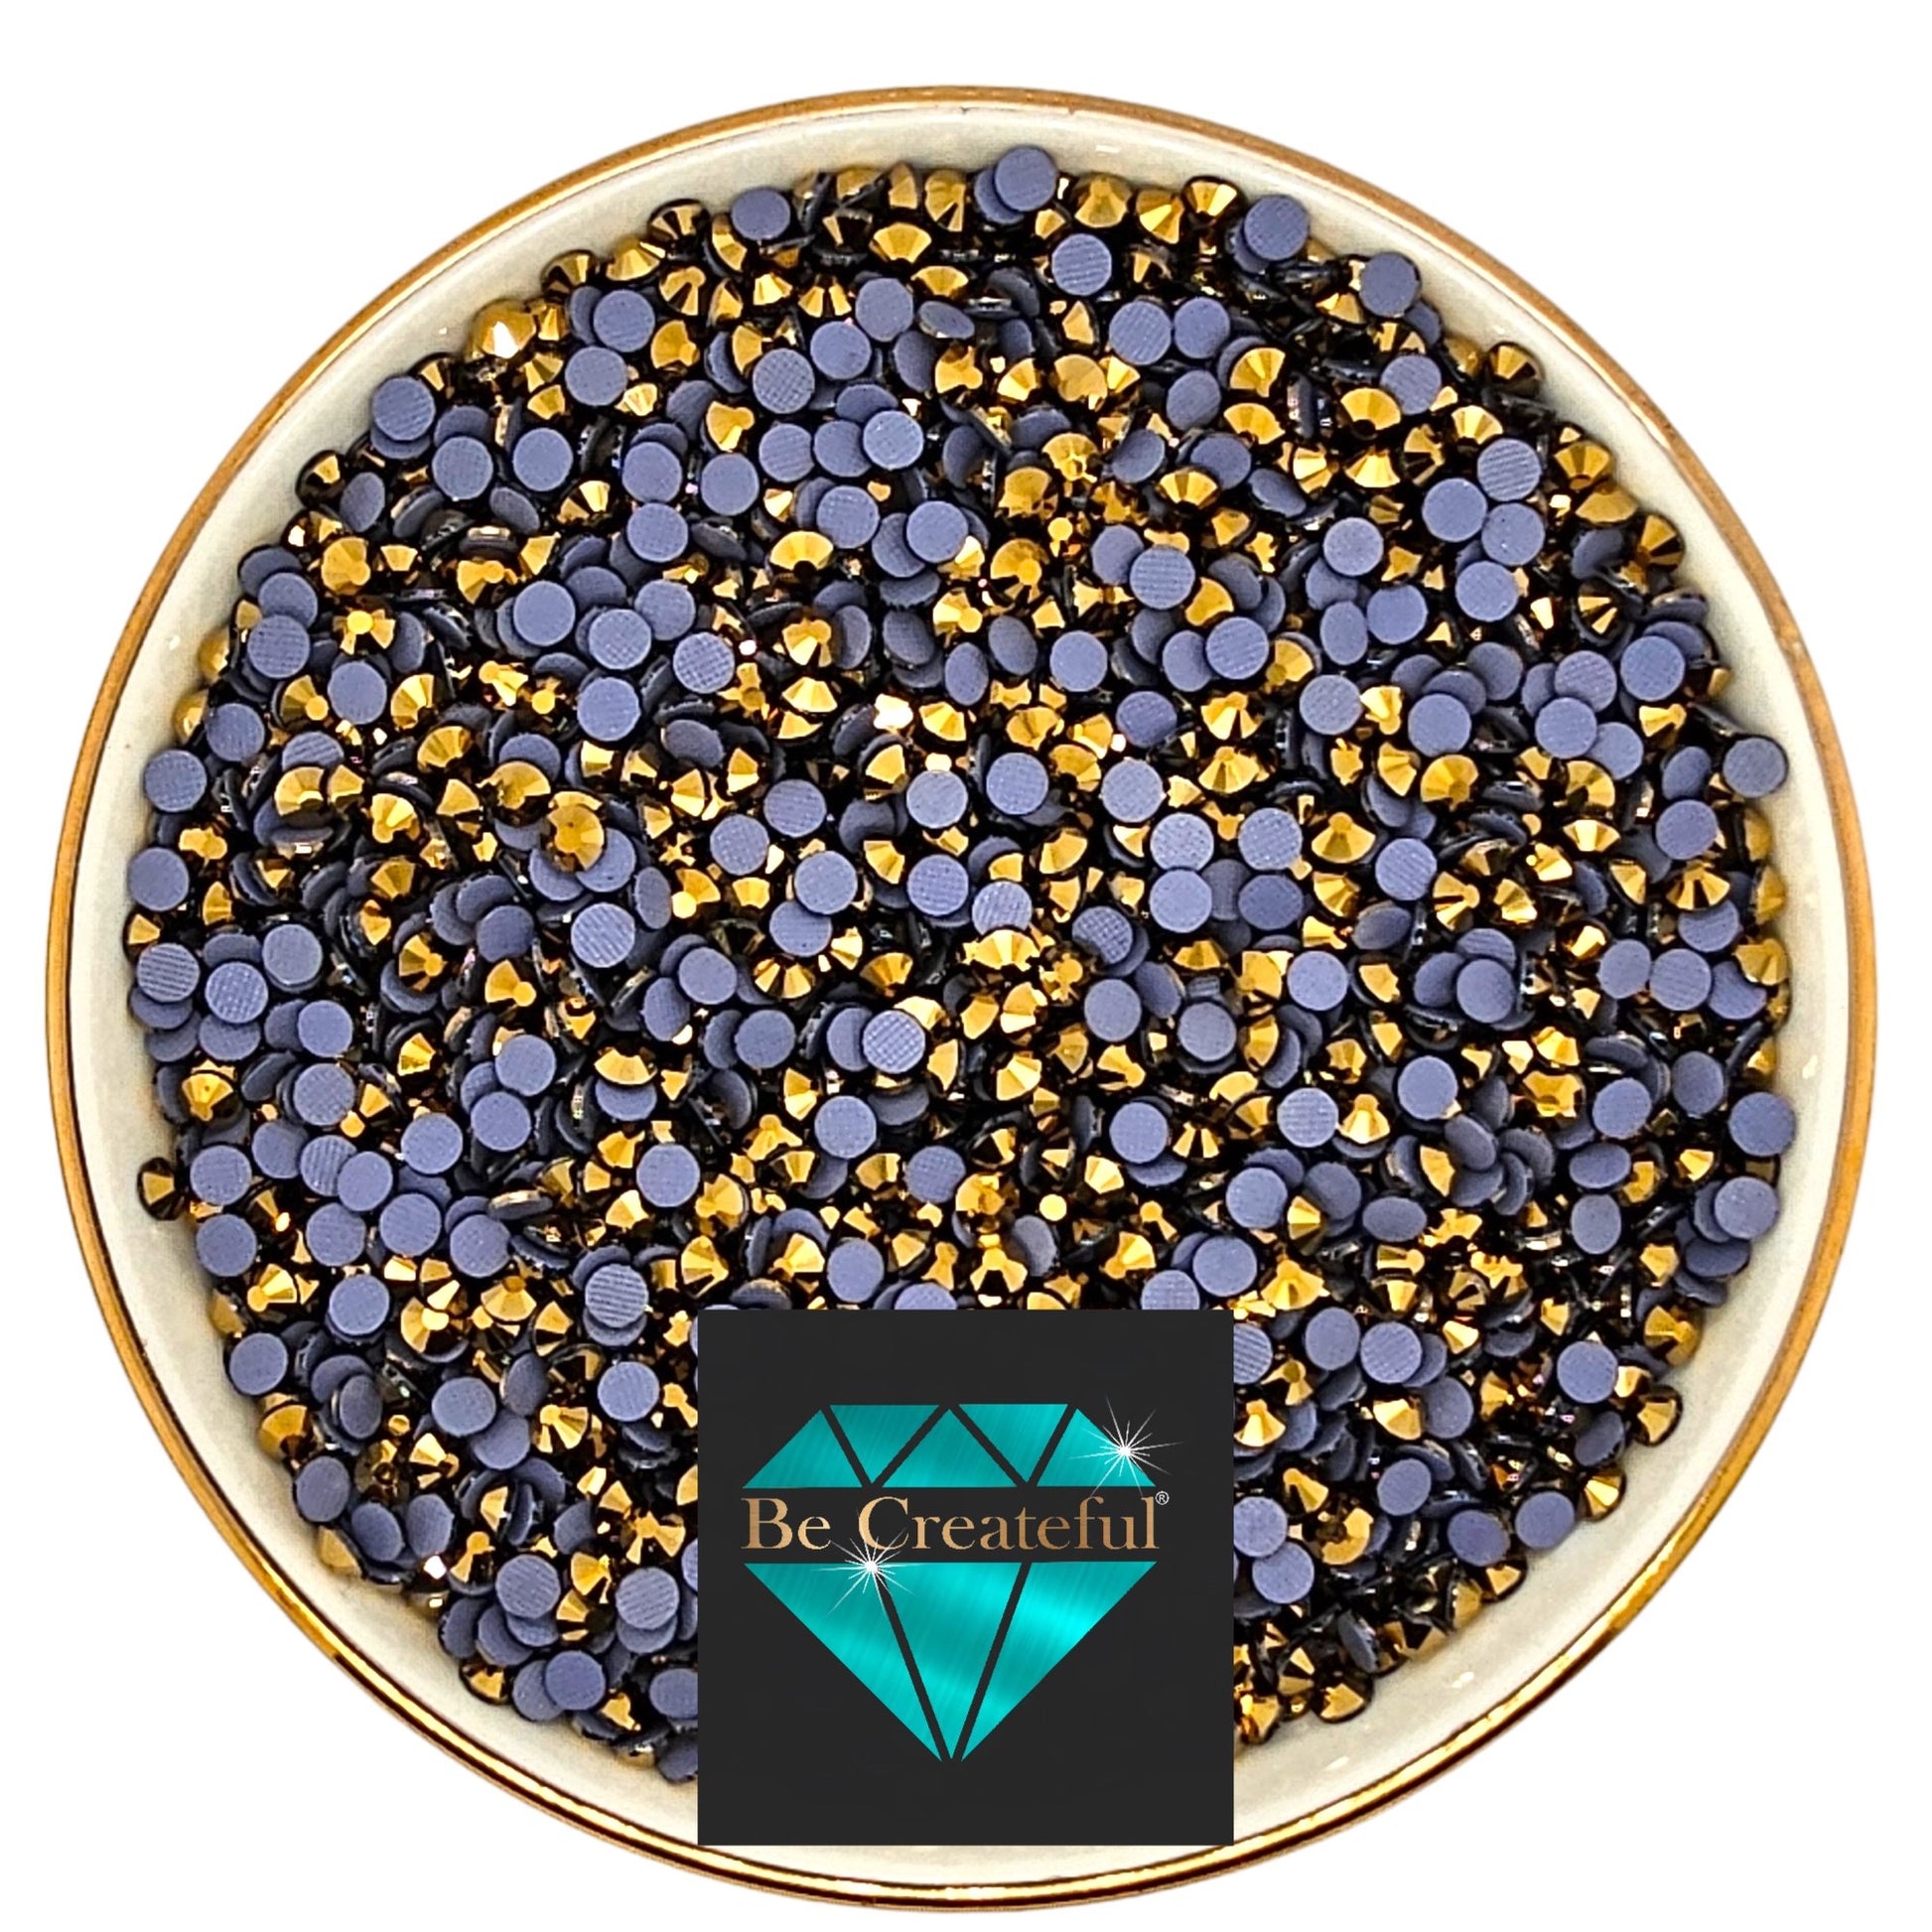 Be Createful LUXE® Aurum Gold Glass Hotfix Rhinestones are high-quality 14-16 facet glass Rhinestone that provides intense sparkle and refraction.